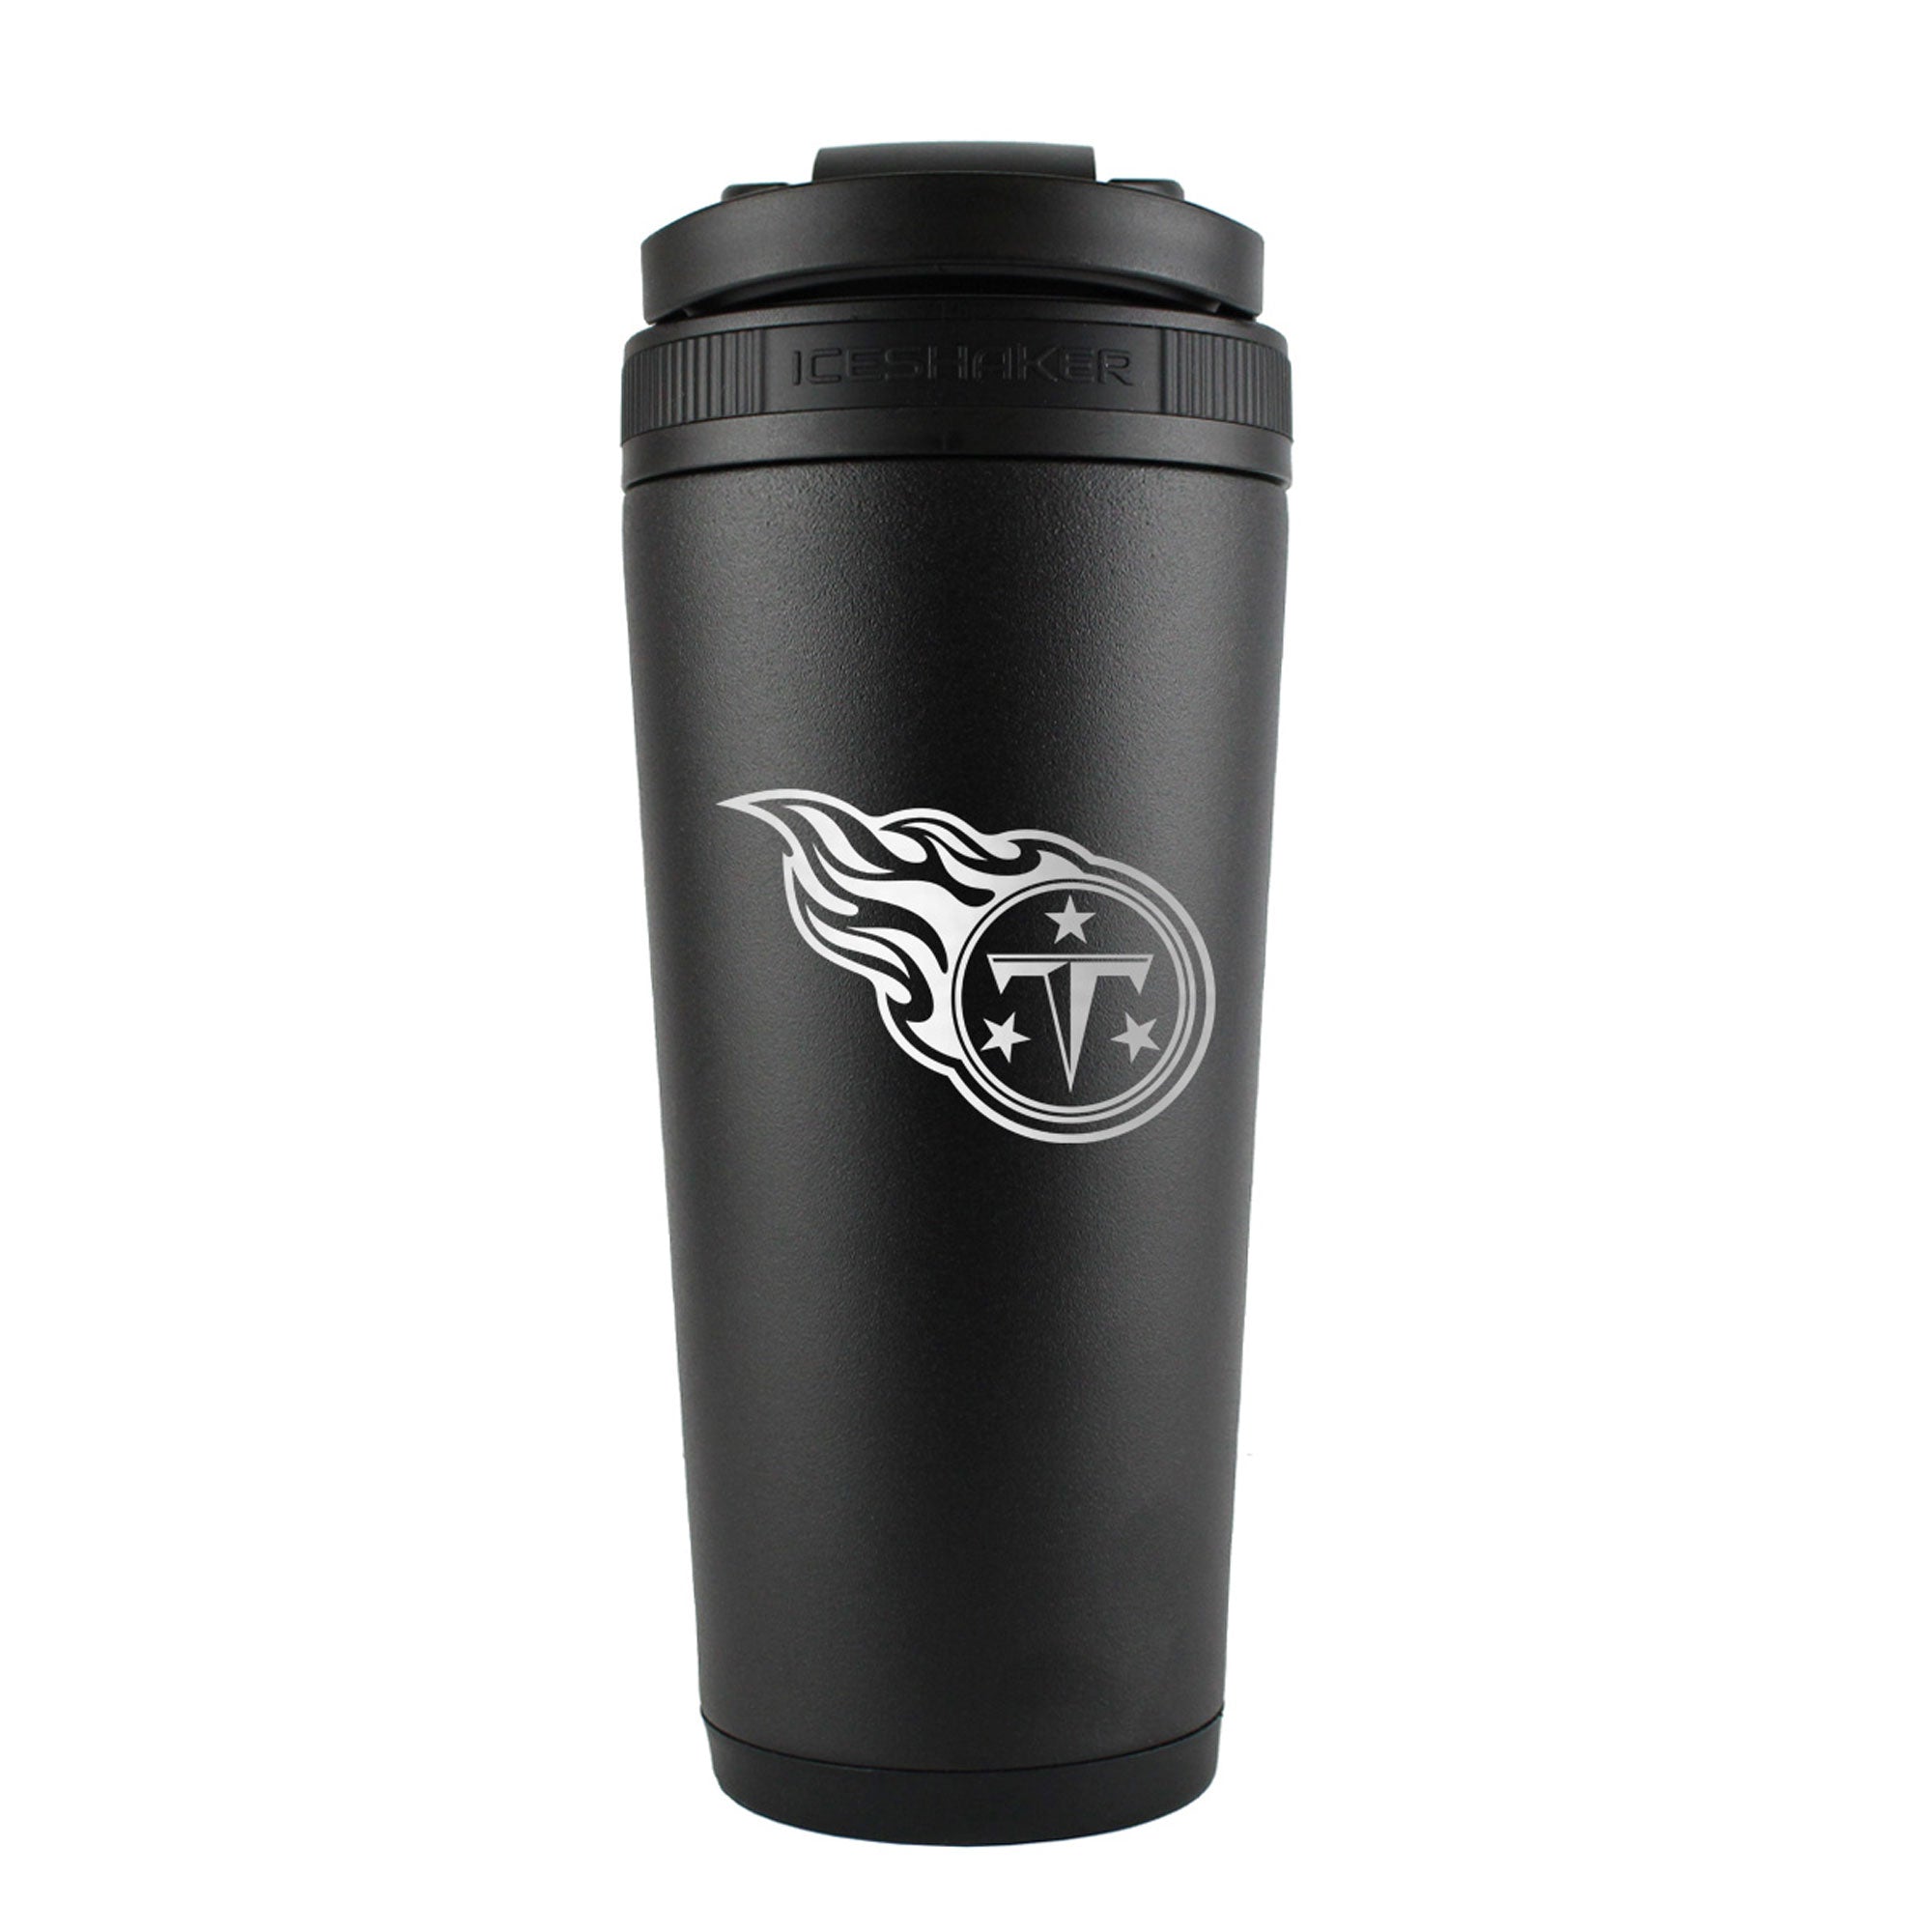 Officially Licensed Tennessee Titans 26oz Ice Shaker - Black